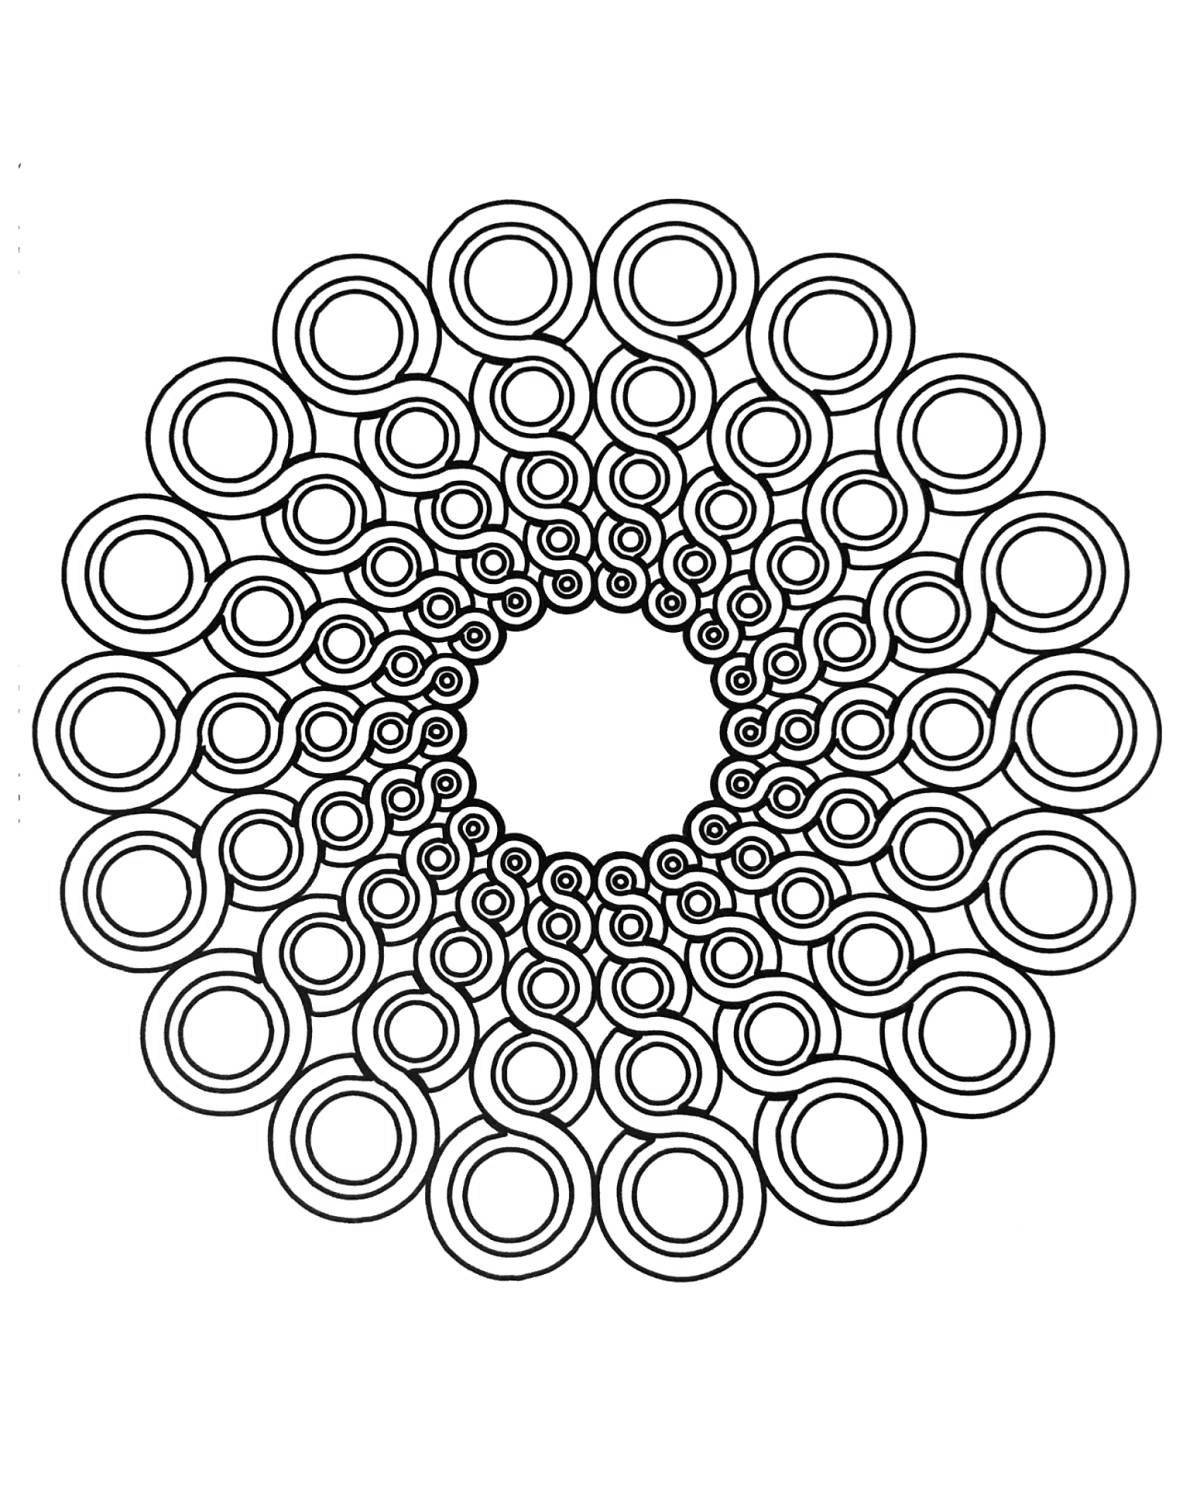 Exciting circular do coloring page